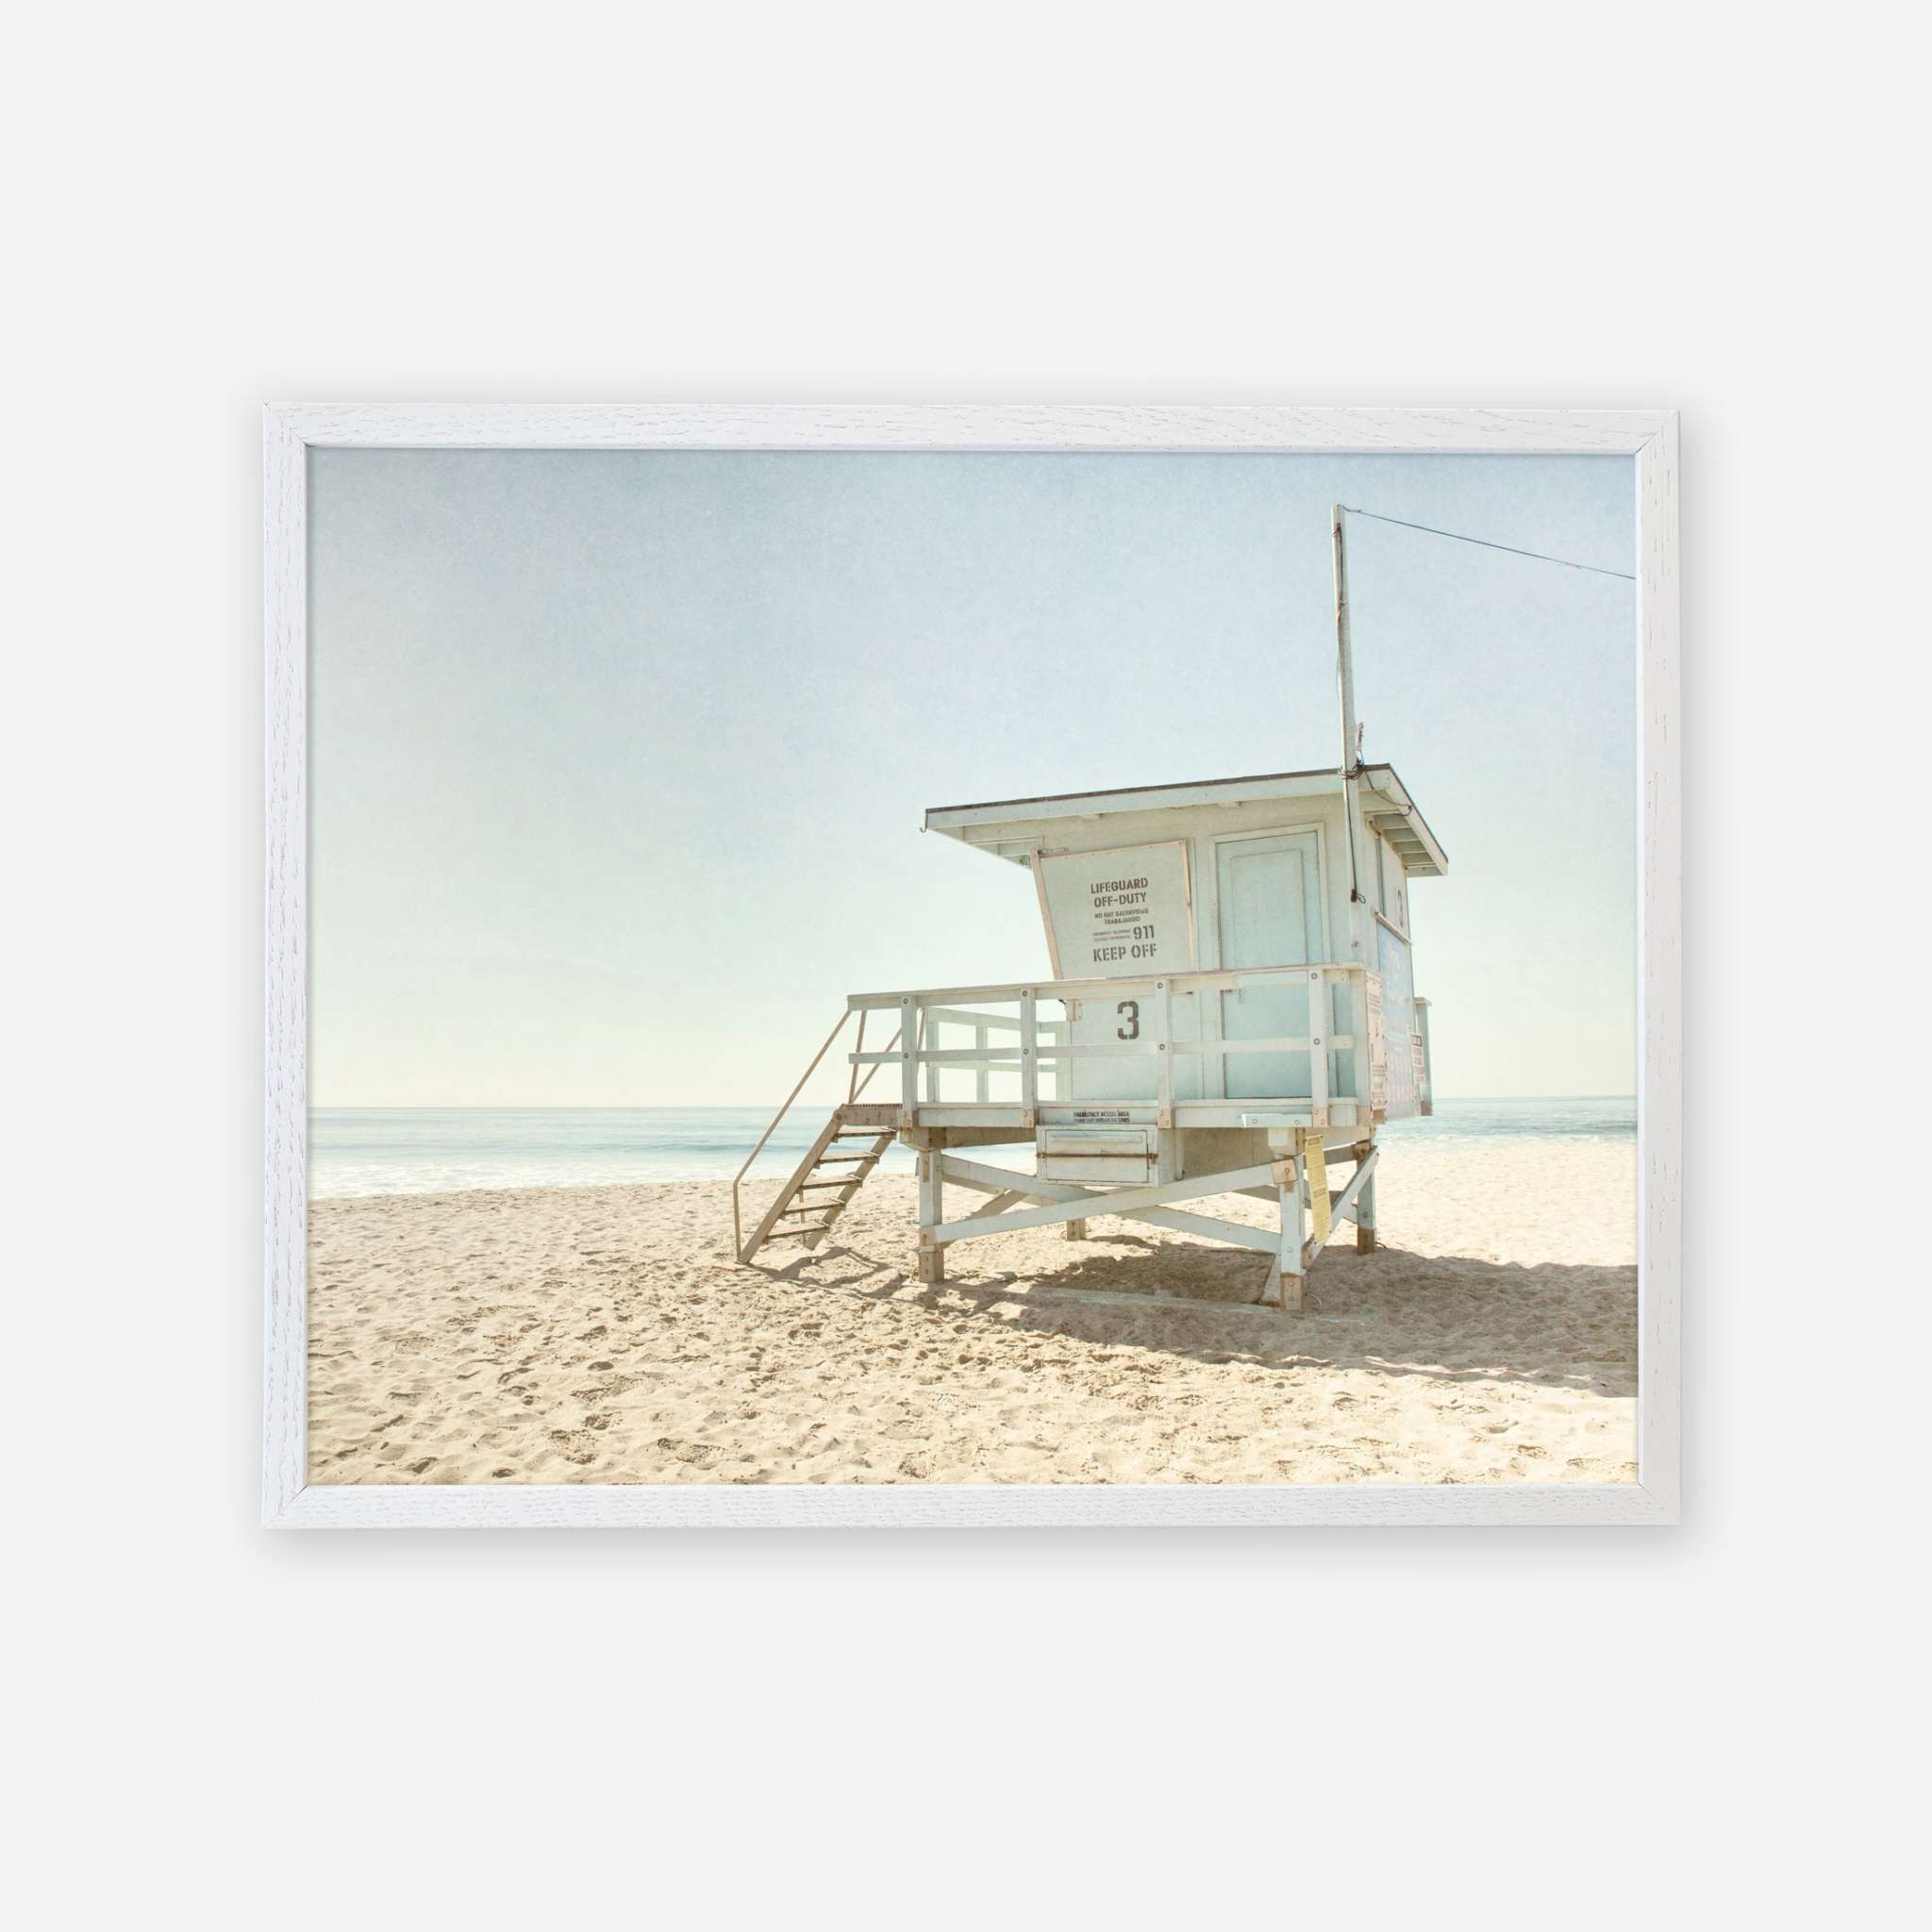 A framed picture of California Summer Beach Art, &#39;Malibu Lifeguard Tower&#39; by Offley Green on a serene beach under a clear sky. The sandy beach is empty, emphasizing the calmness of the setting.